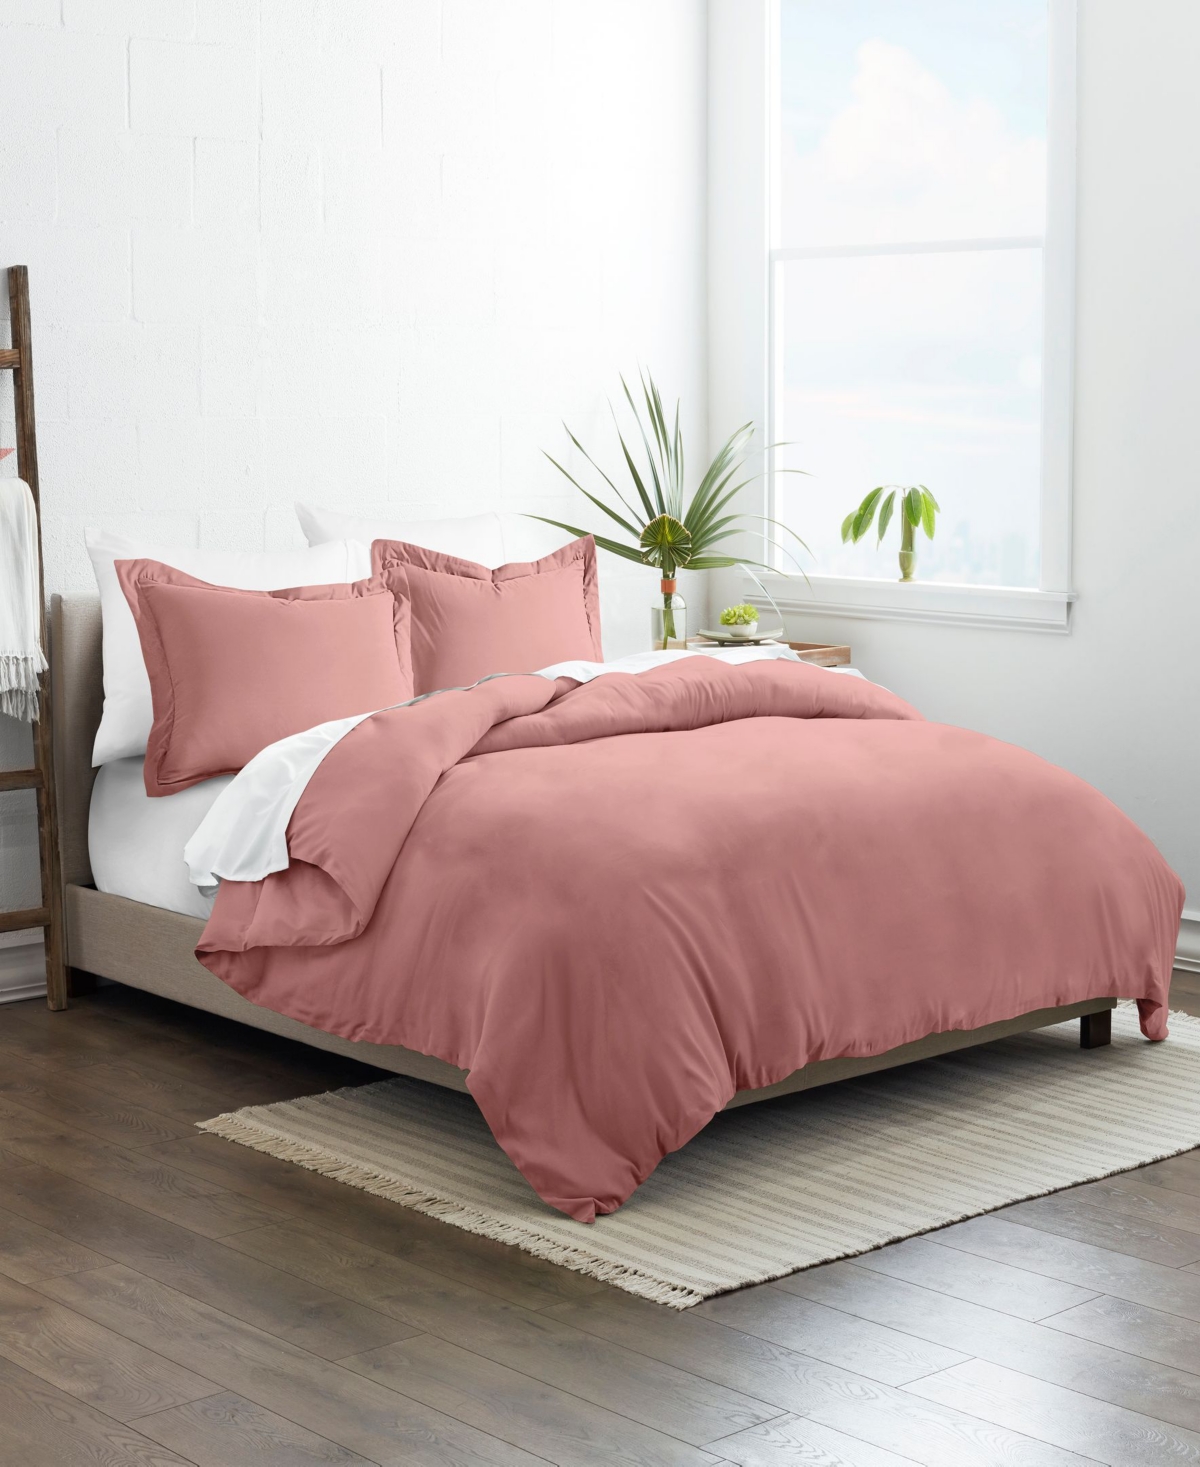 Ienjoy Home Dynamically Dashing Duvet Cover Set By The Home Collection, King/california King In Clay